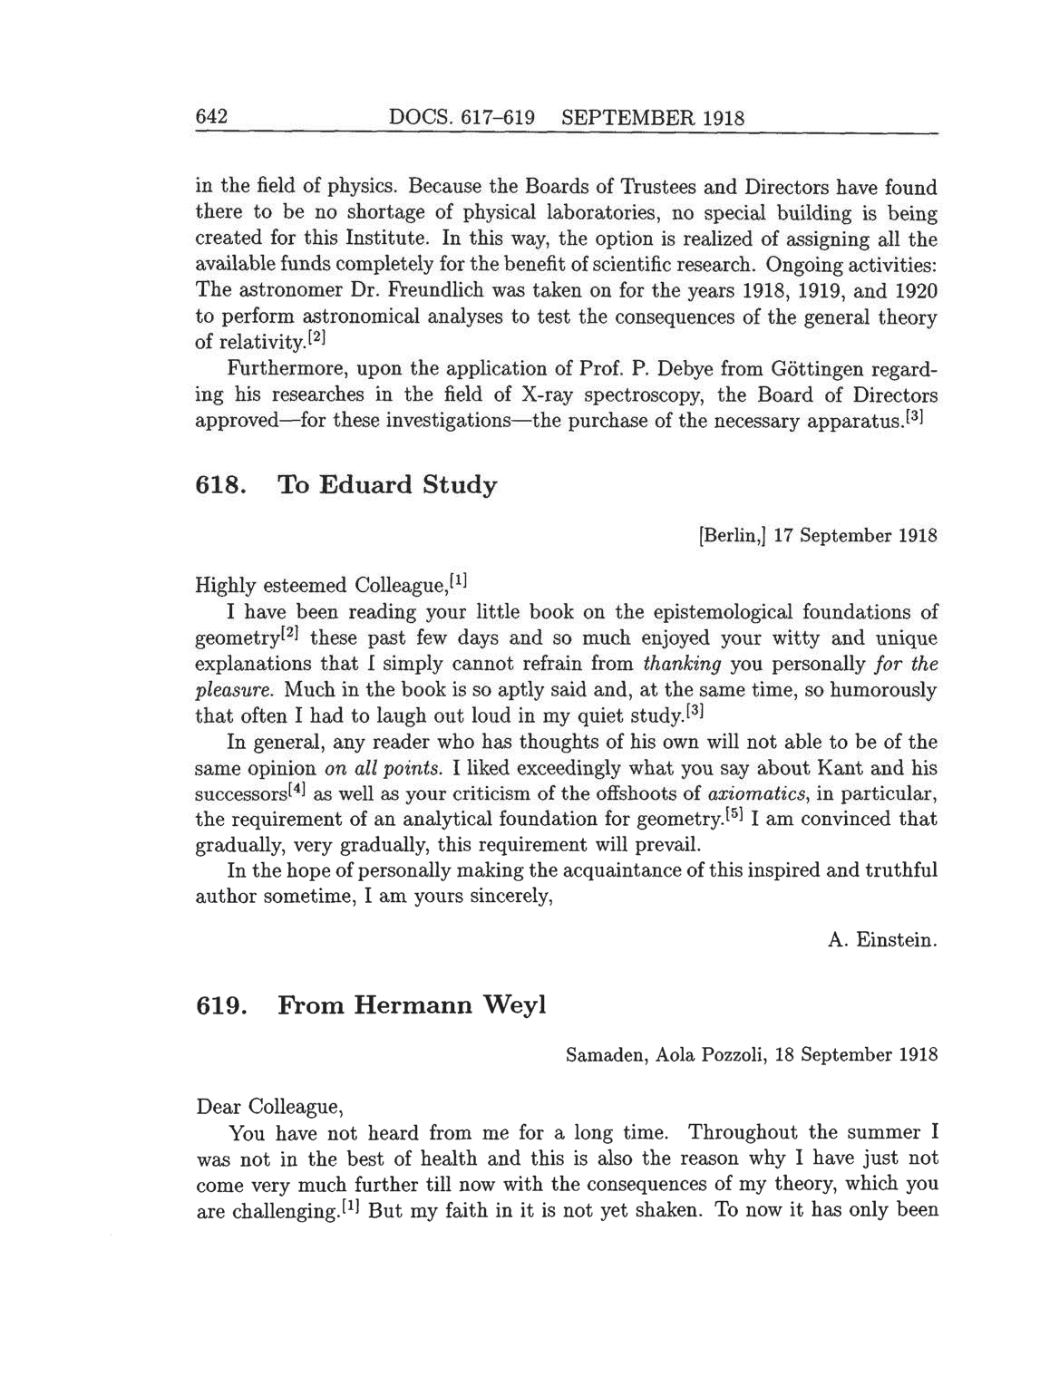 Volume 8: The Berlin Years: Correspondence, 1914-1918 (English translation supplement) page 642